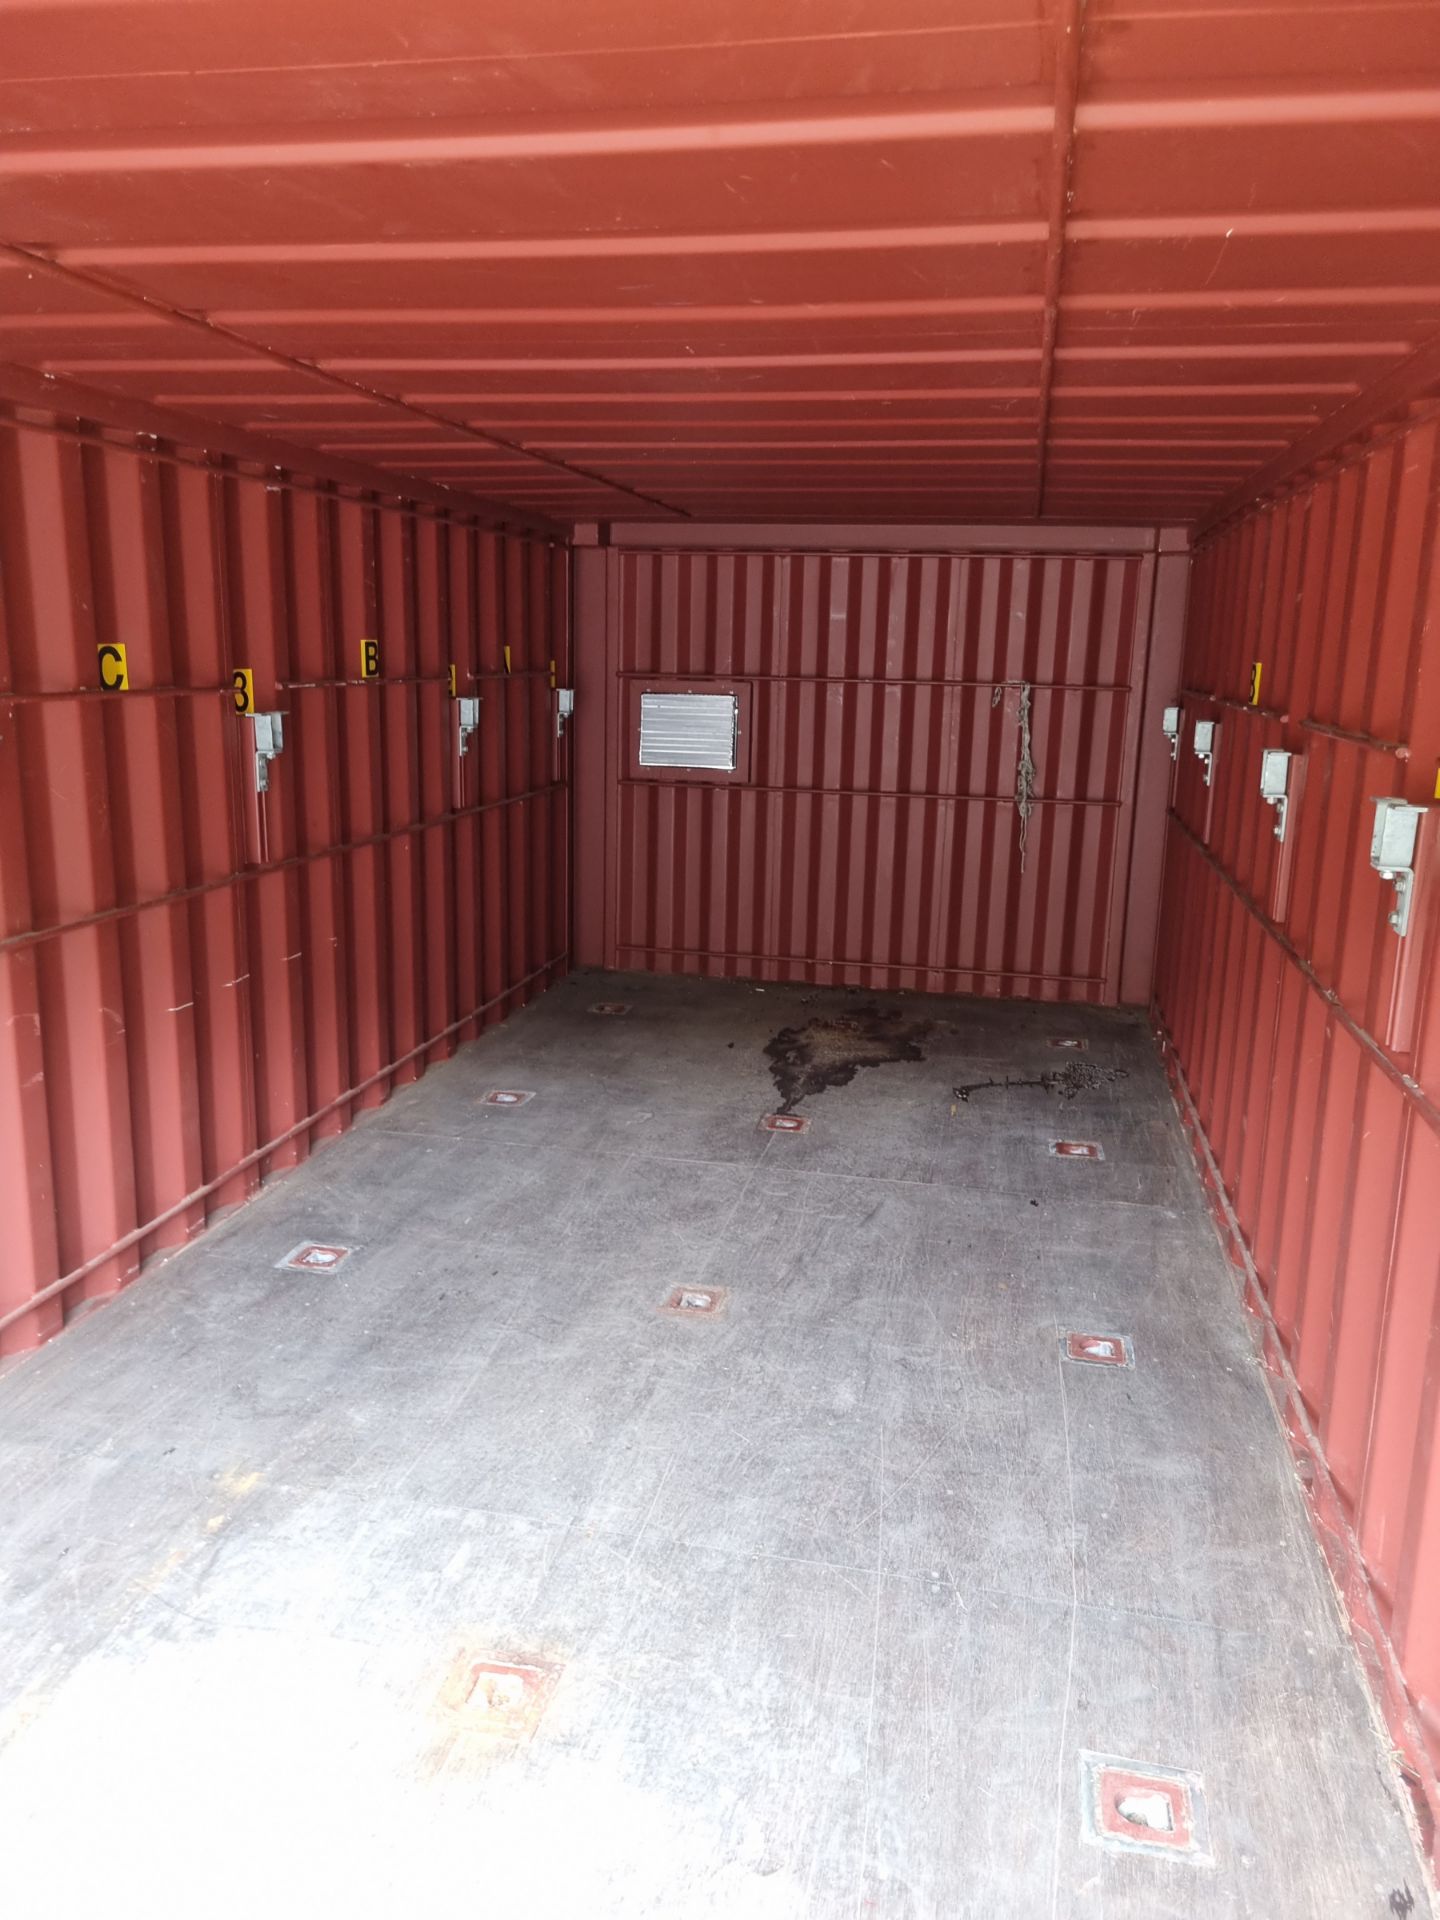 Stonehaven Engineering Ltd transportable storage container ISO 499/99/01 - dimensions: 20ft x 8ft x - Image 6 of 6